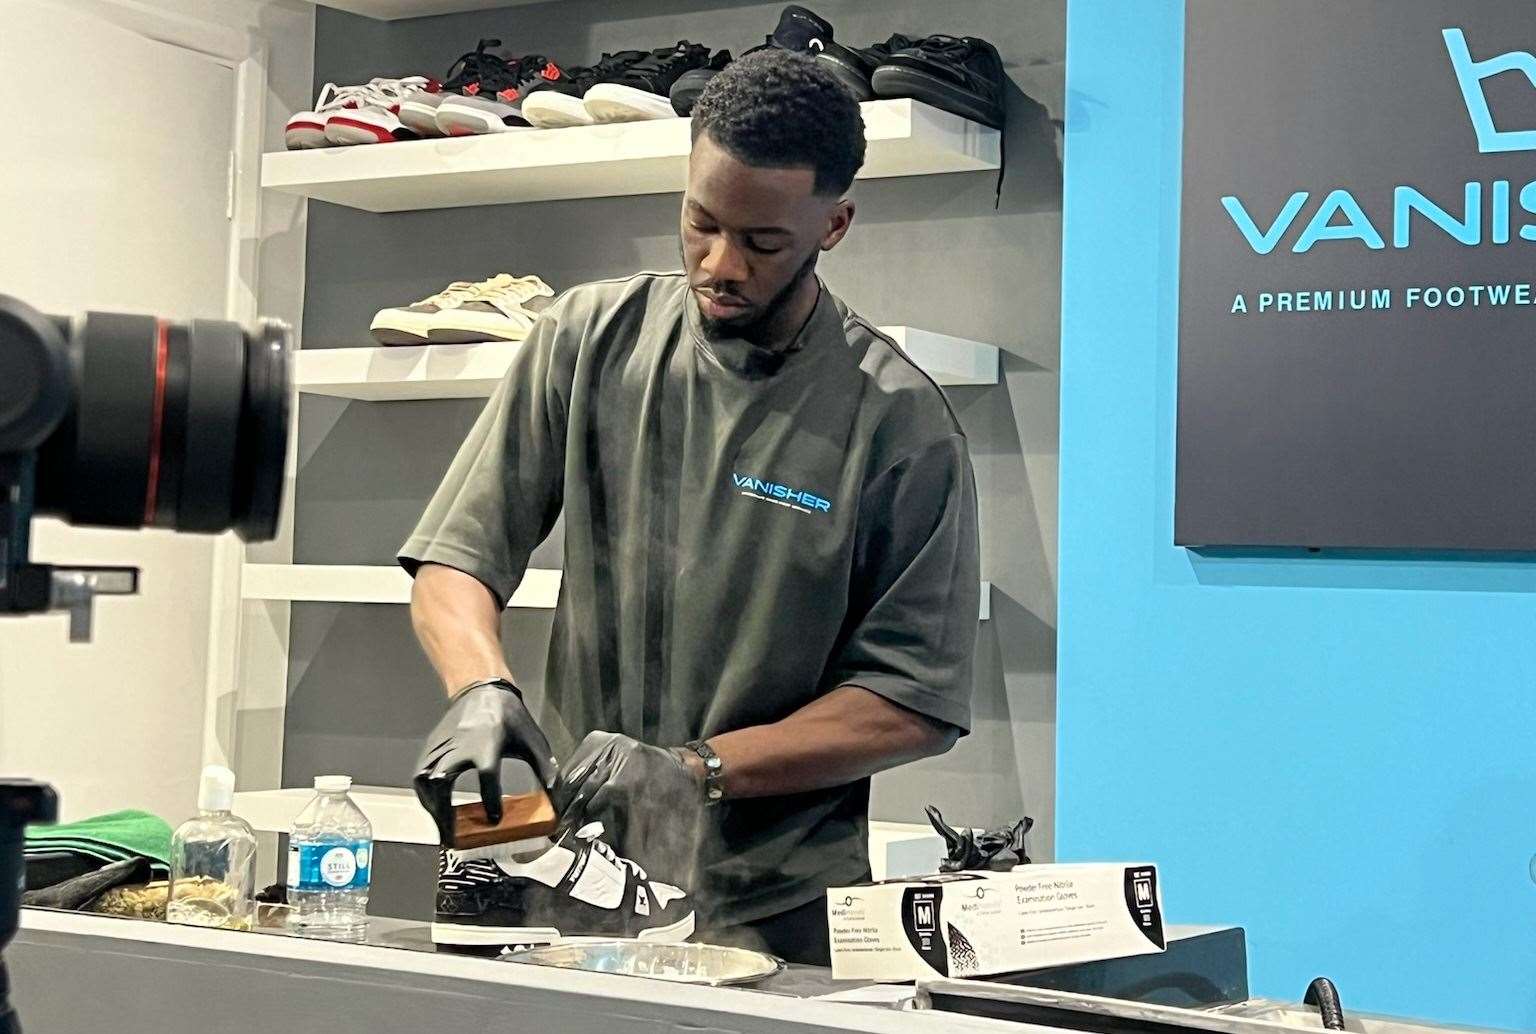 Gabriel Aiyelabola, who grew up in Chatham, will be opening his first shoe cleaning store next month